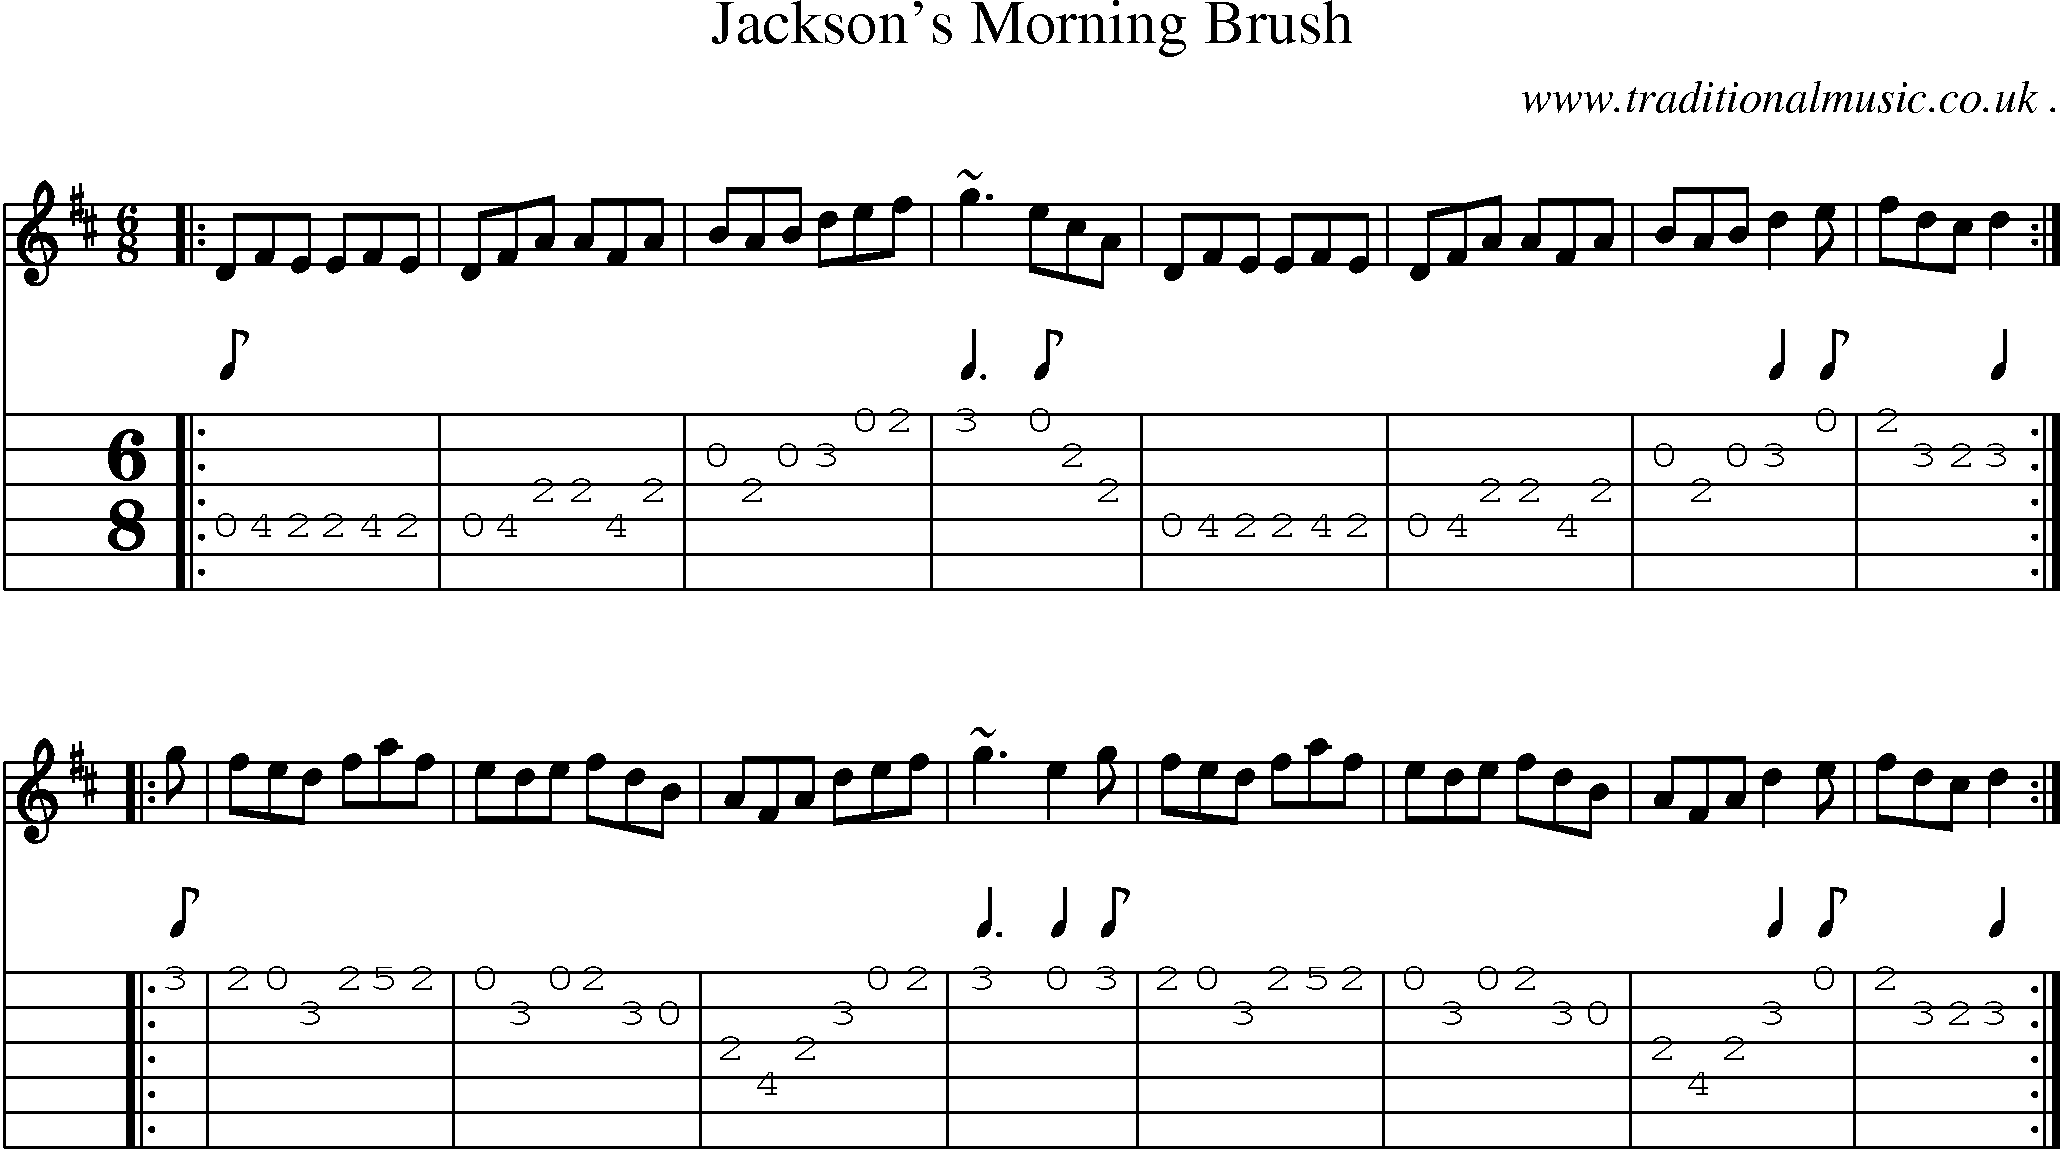 Sheet-music  score, Chords and Guitar Tabs for Jacksons Morning Brush